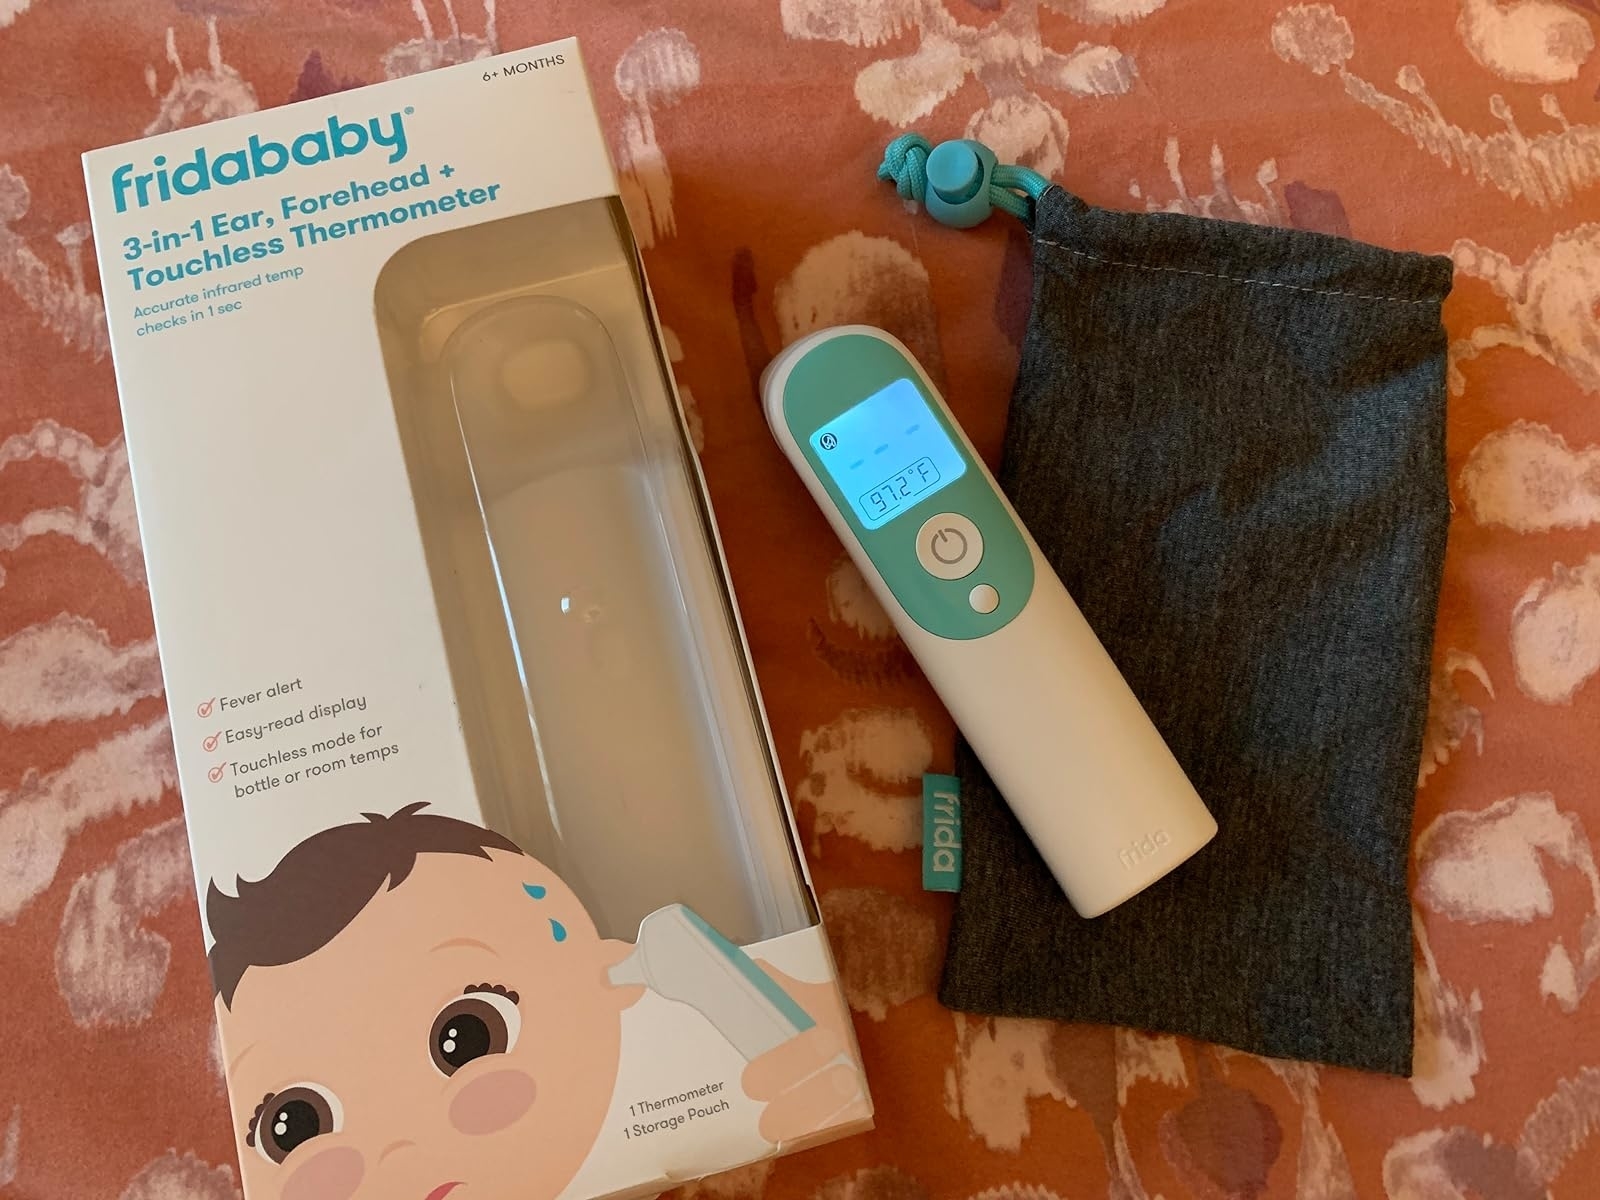 3-in-1 ear, forehead, touchless thermometer by Fridababy with packaging, a carrying pouch, and a displayed temperature reading